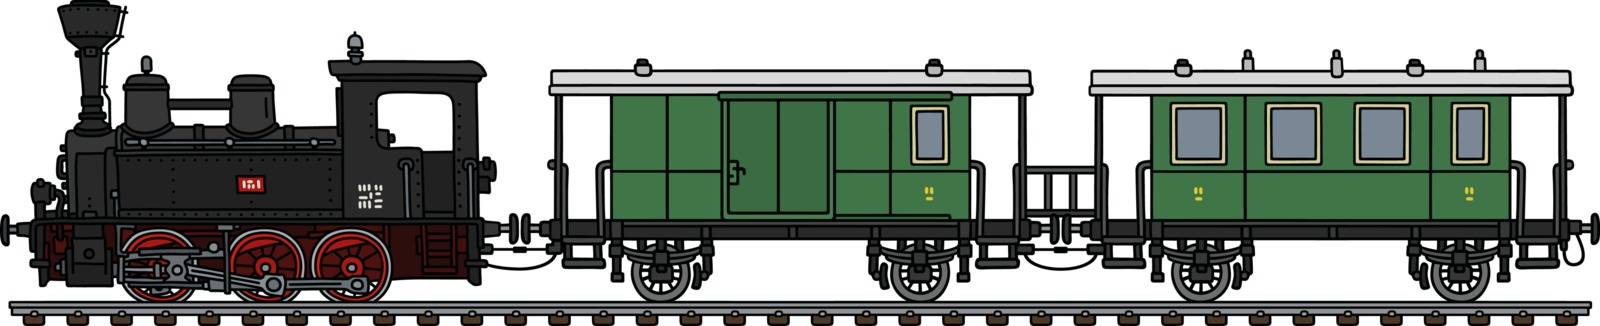 The vectorized hand drawing of a vintage small personal steam train